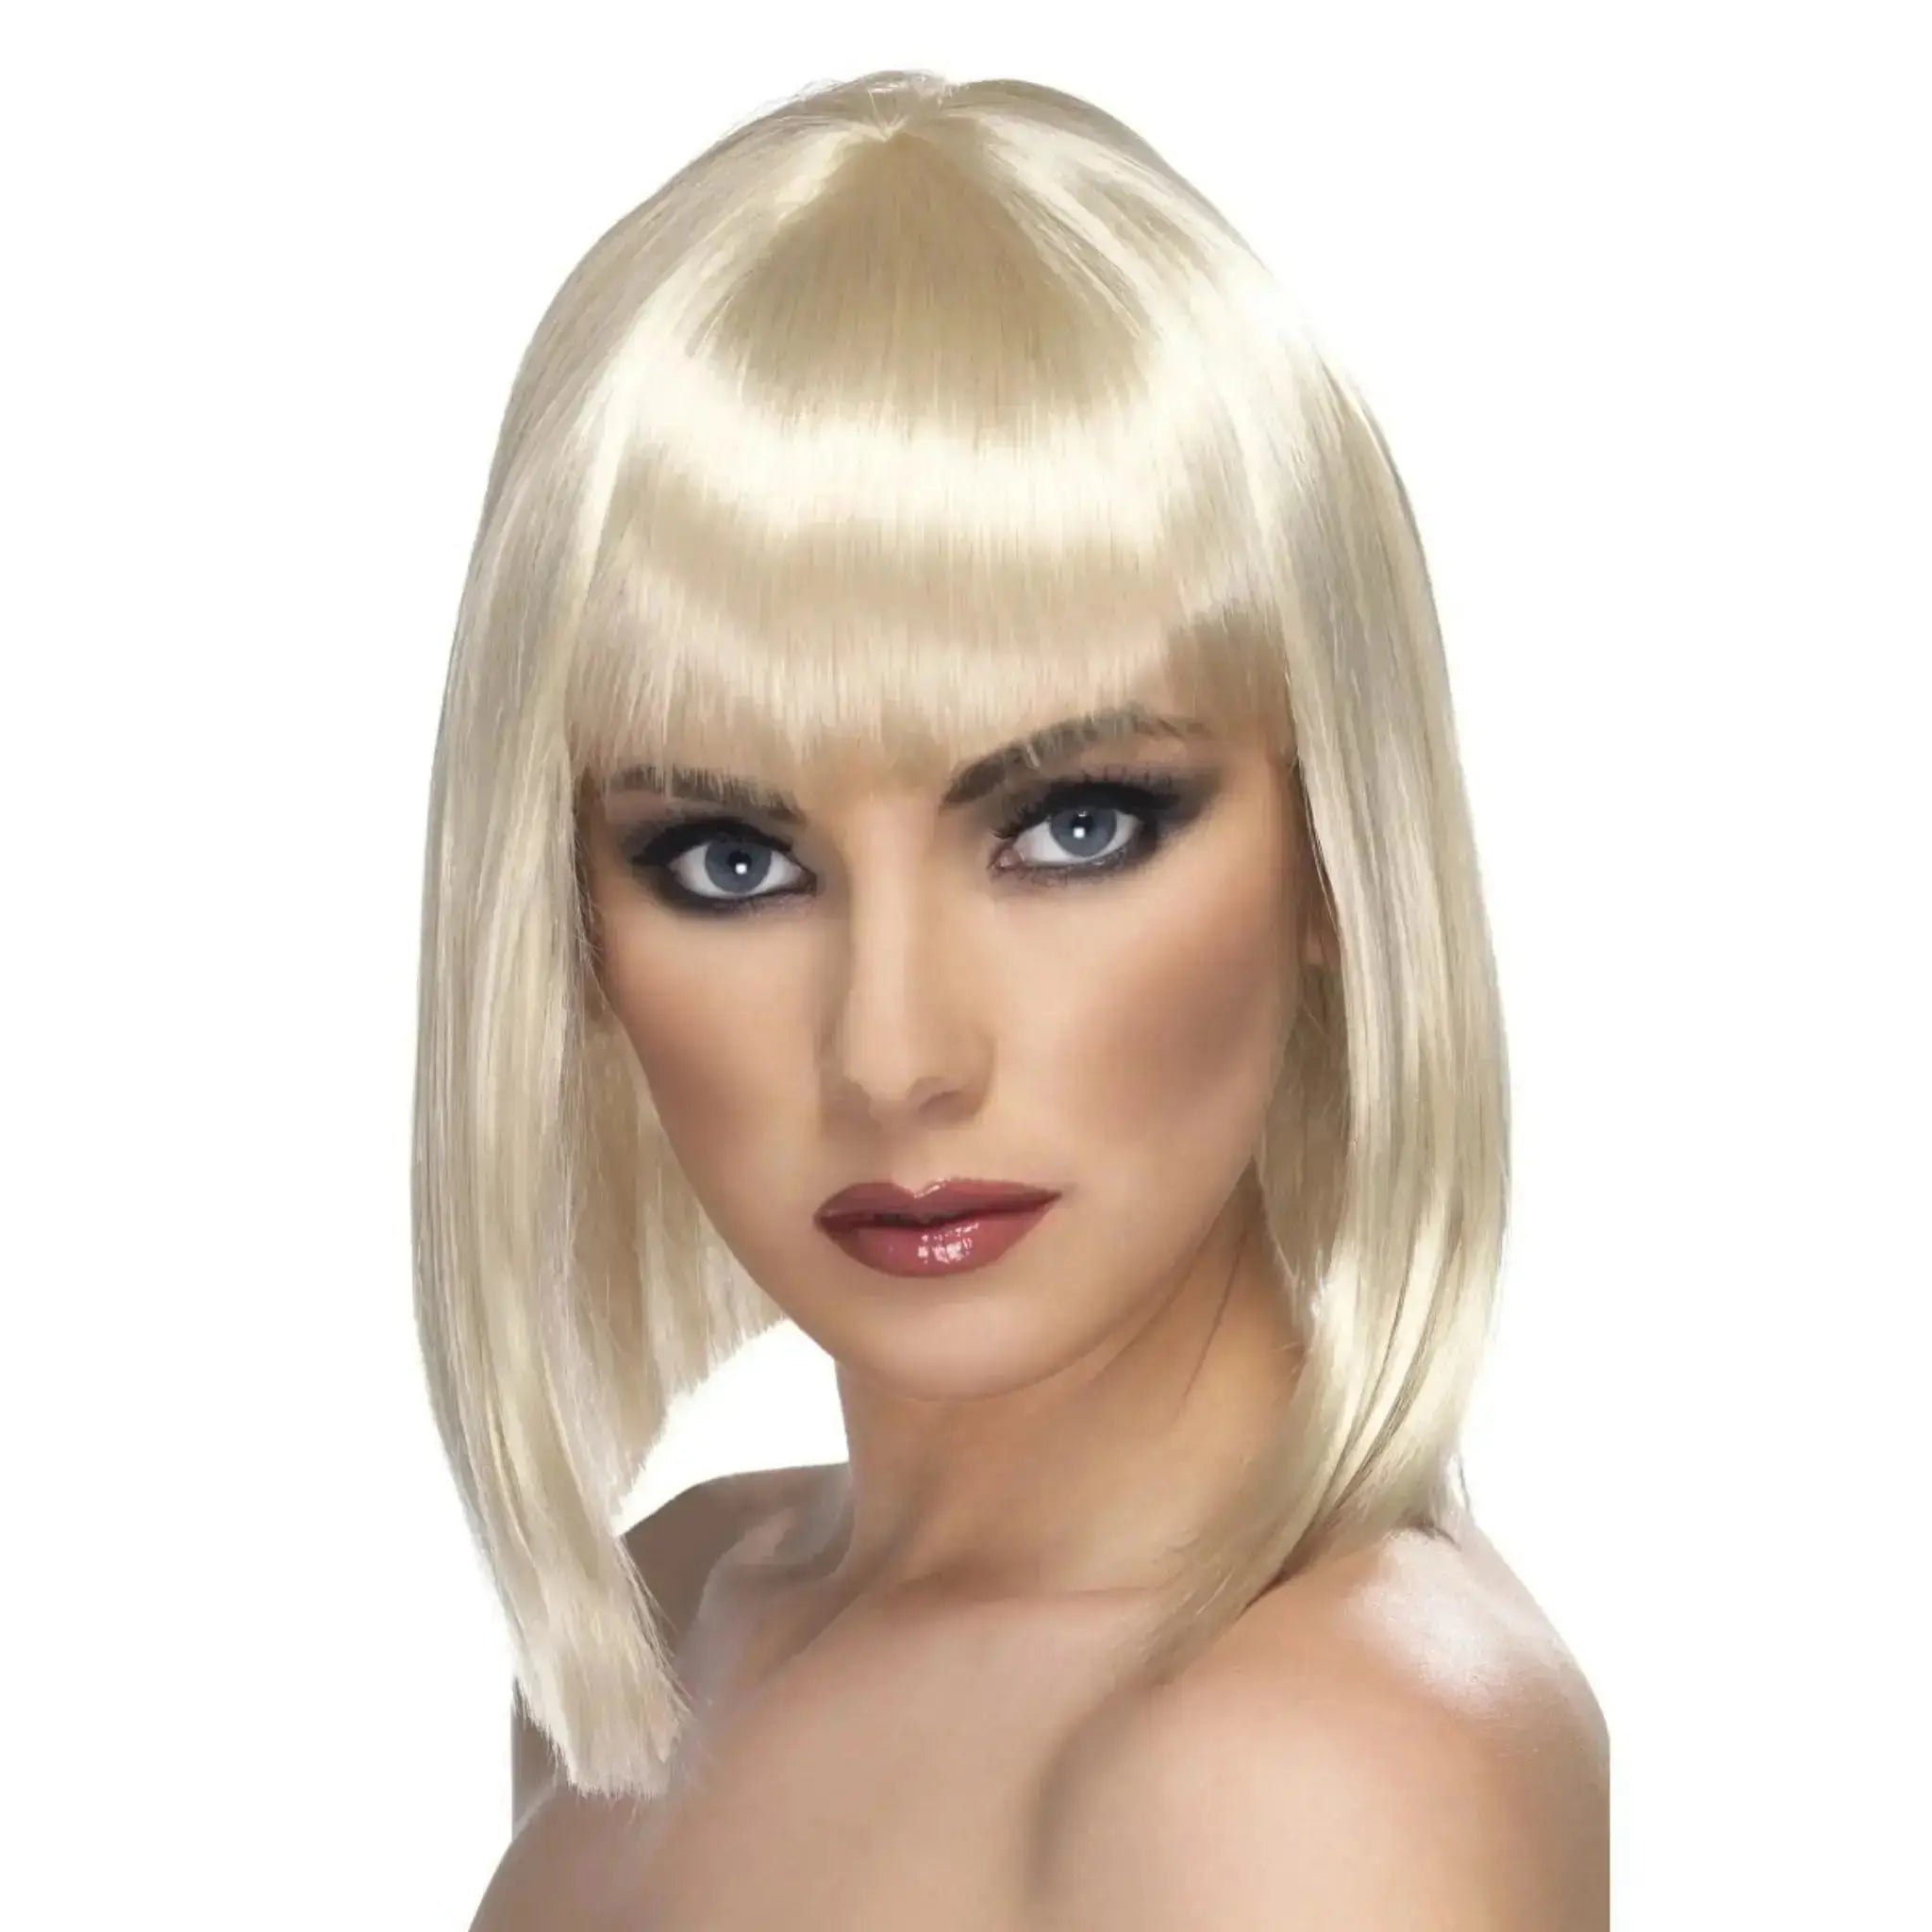 Glam Wig | The Party Hut